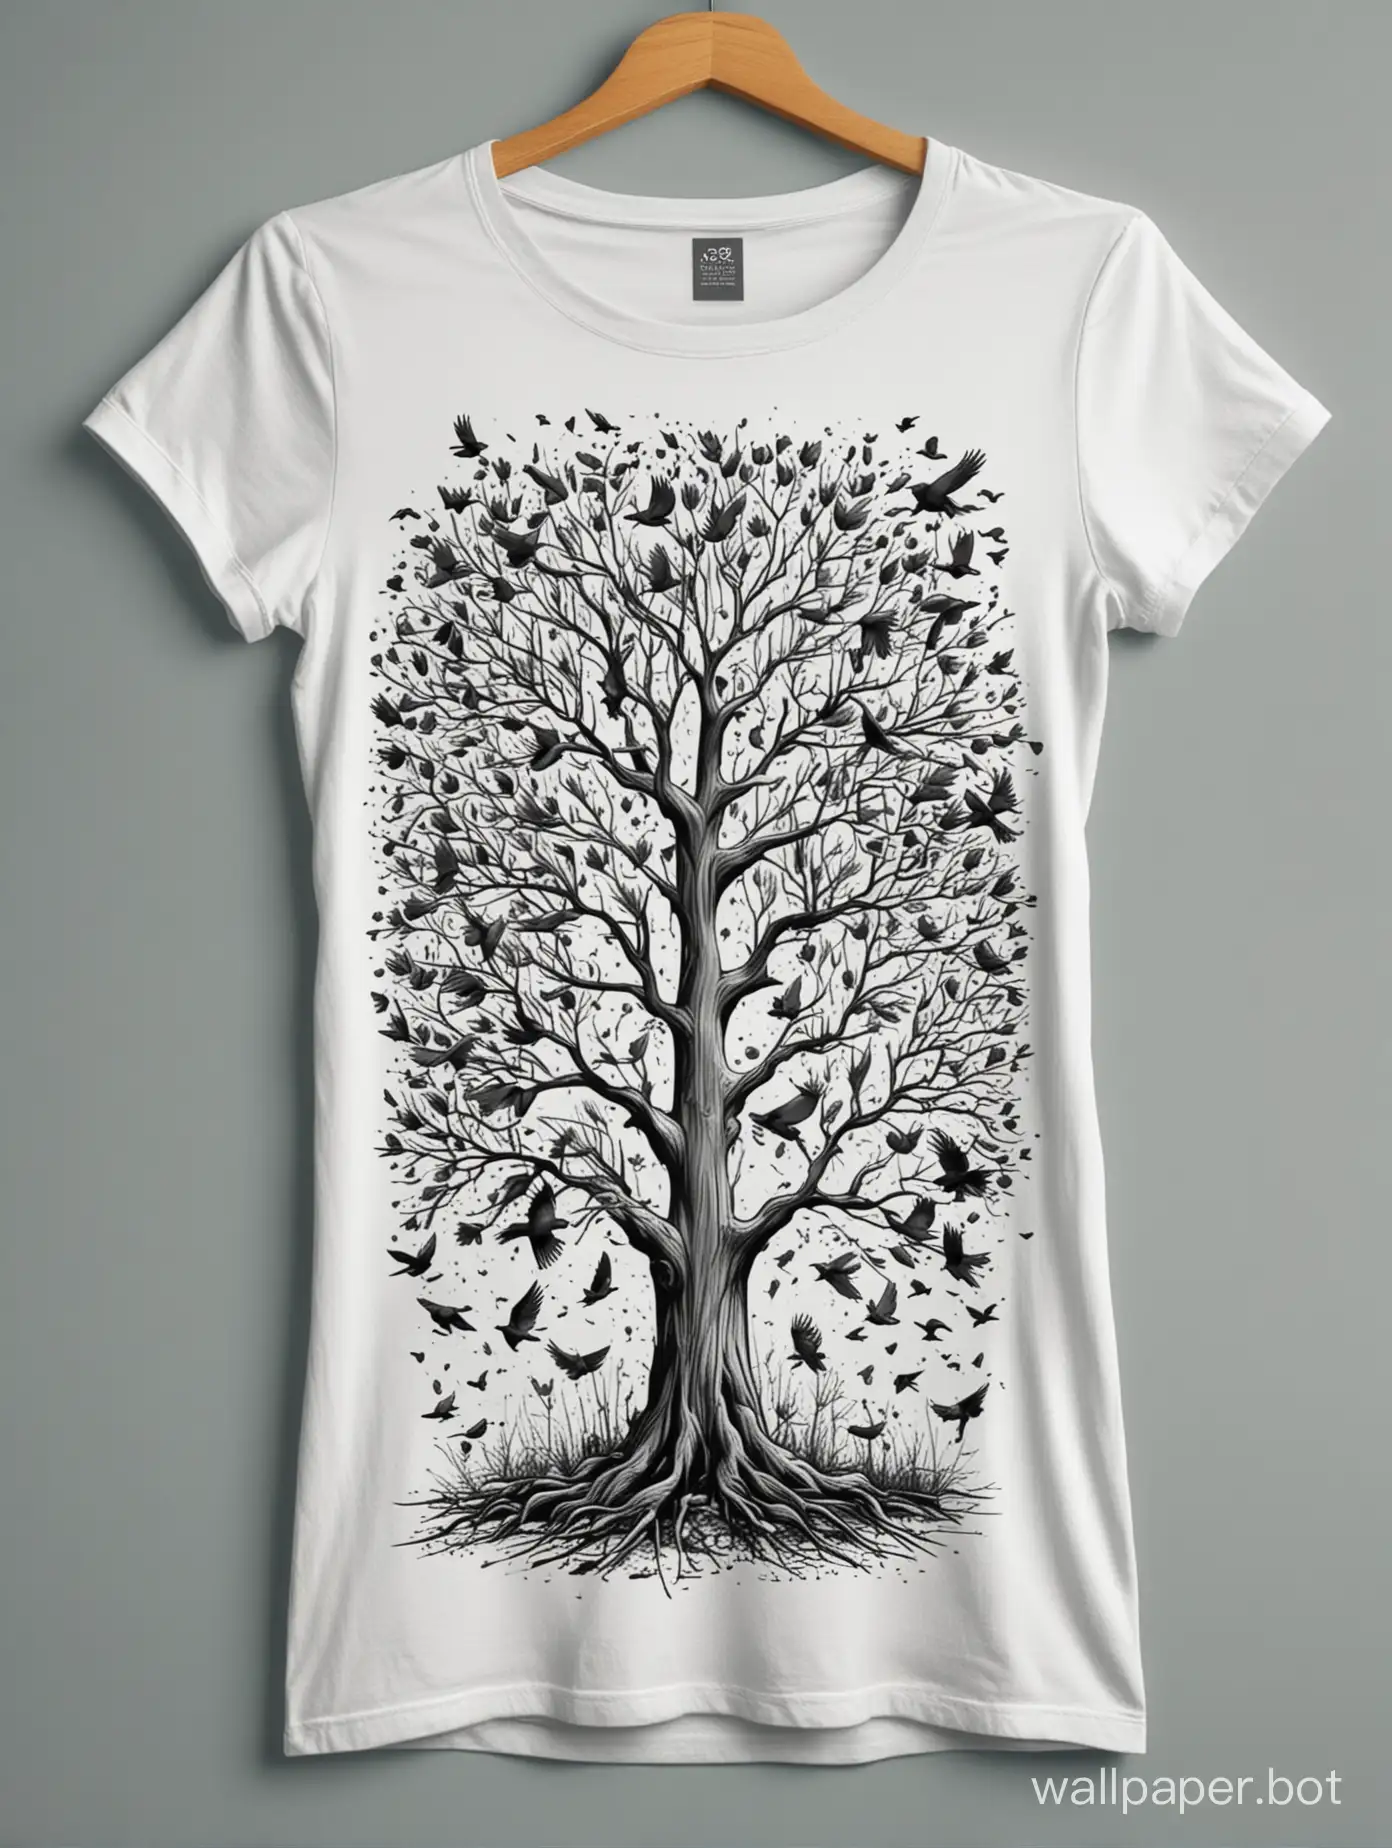 Urban-Street-Art-Style-Female-TShirt-Mockup-with-Monochrome-Tree-and-Explosive-Colors